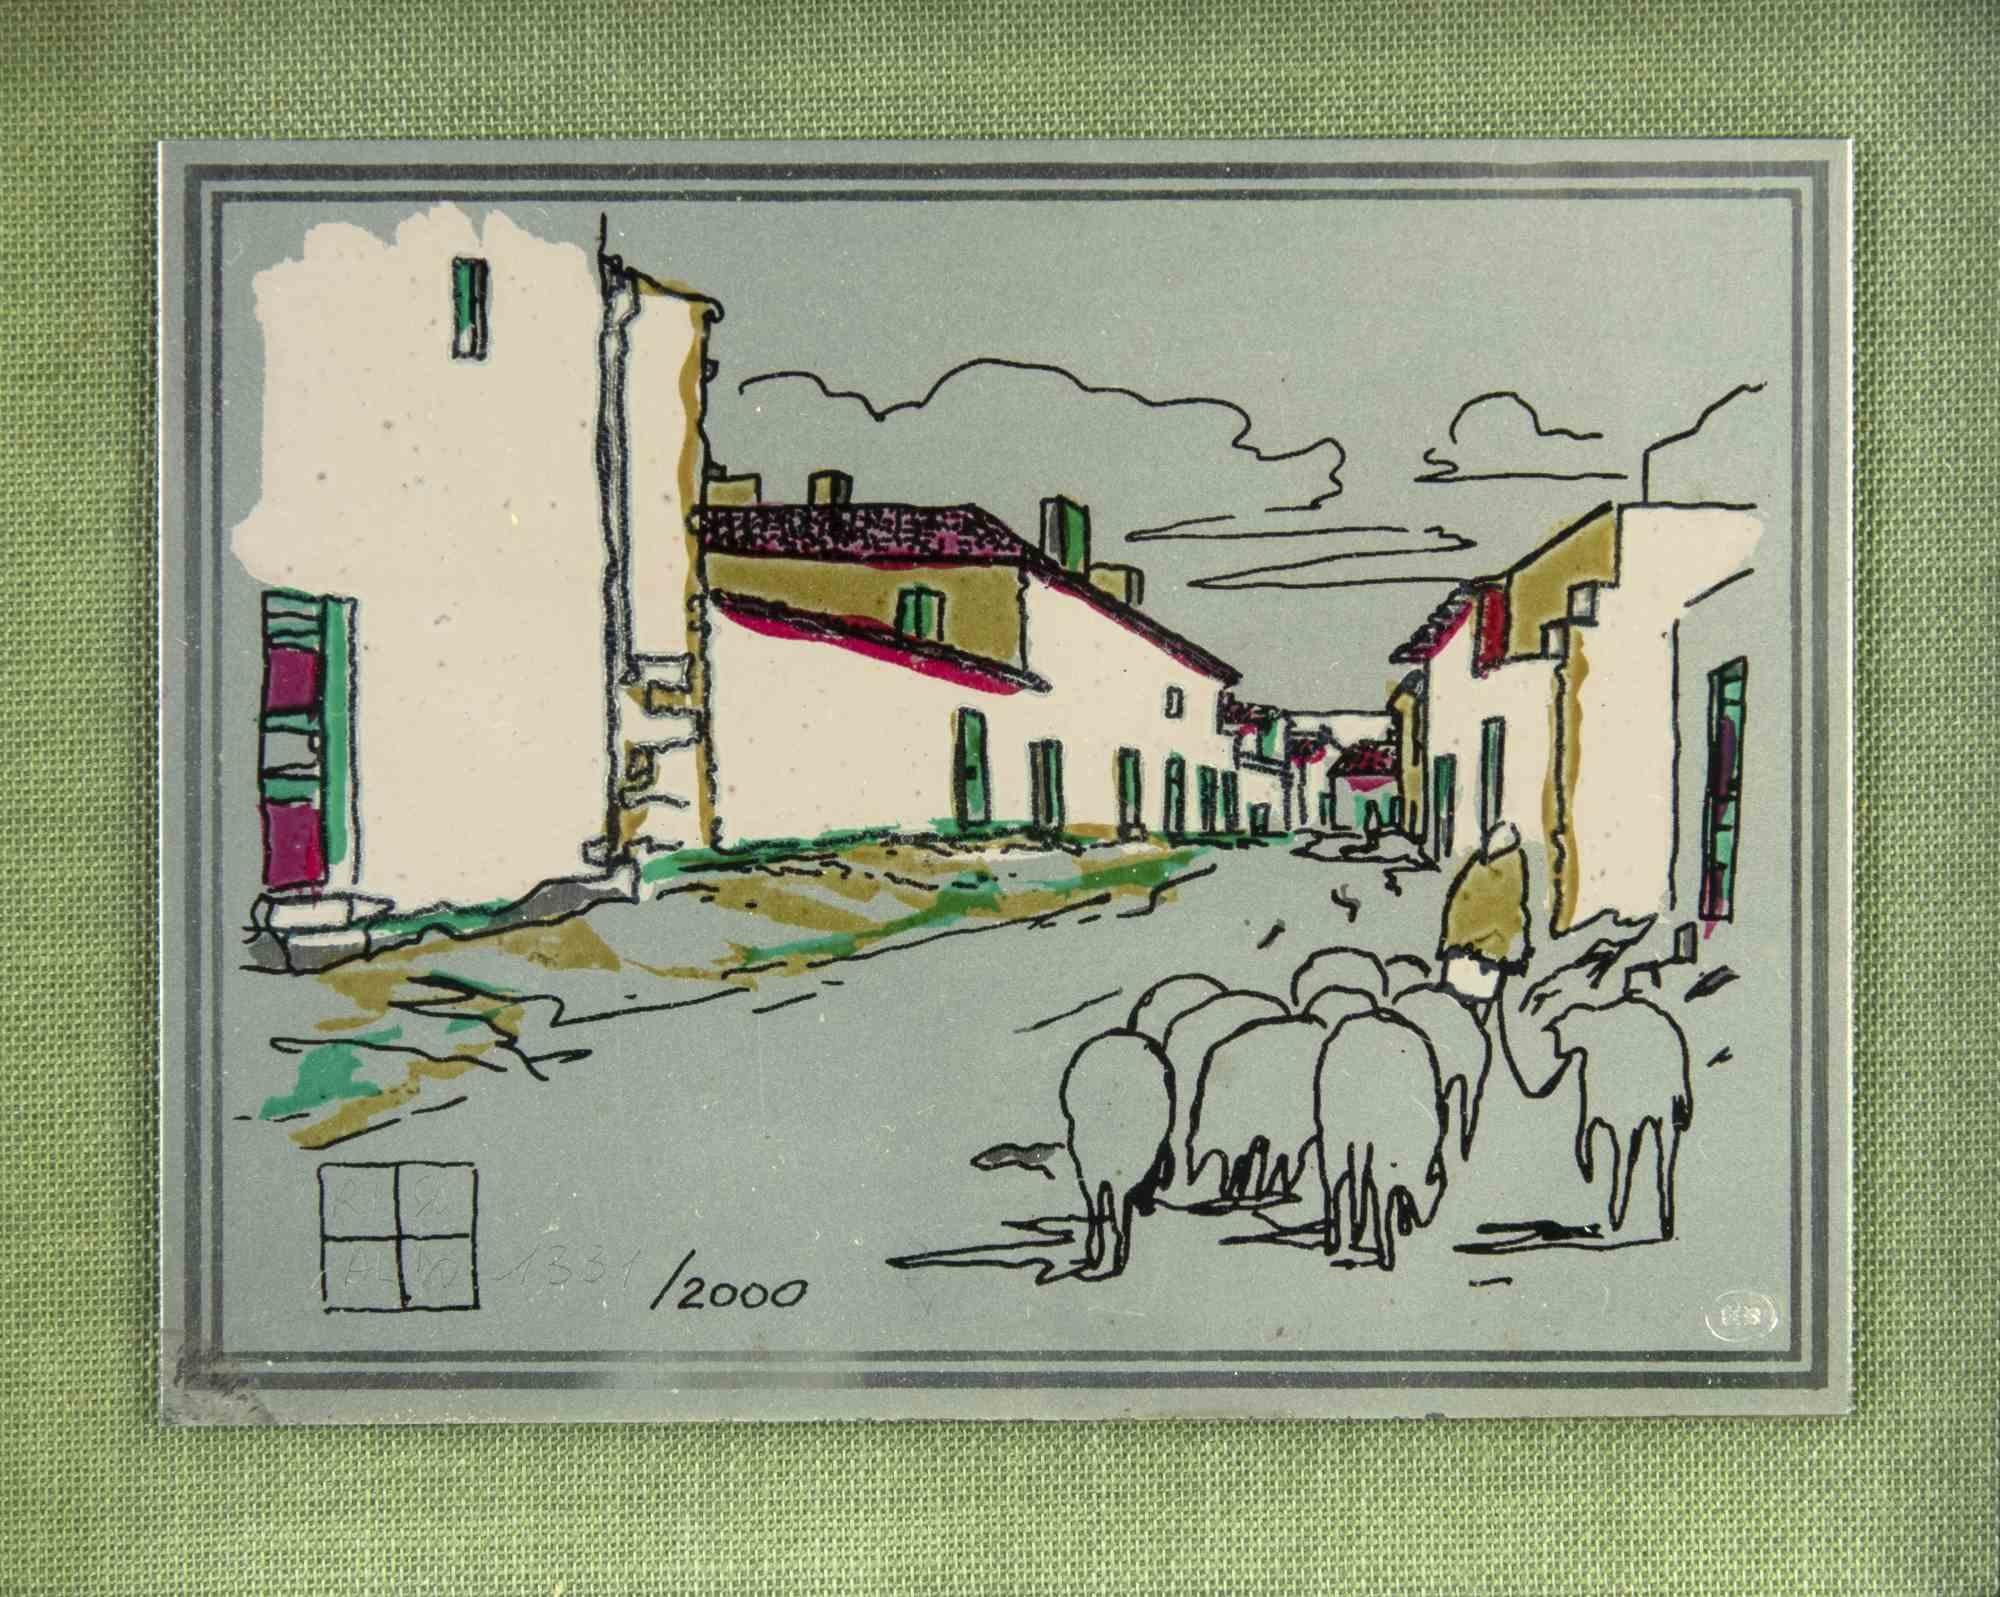 Urban Landscape with Sheeps is an artwork realized by Aldo Riso, 1970s. 

Color screenprint. 

24 x 27 cm, with frame.

Includes frame. Edition of 2000.

Hand signed lower right.

Good conditions